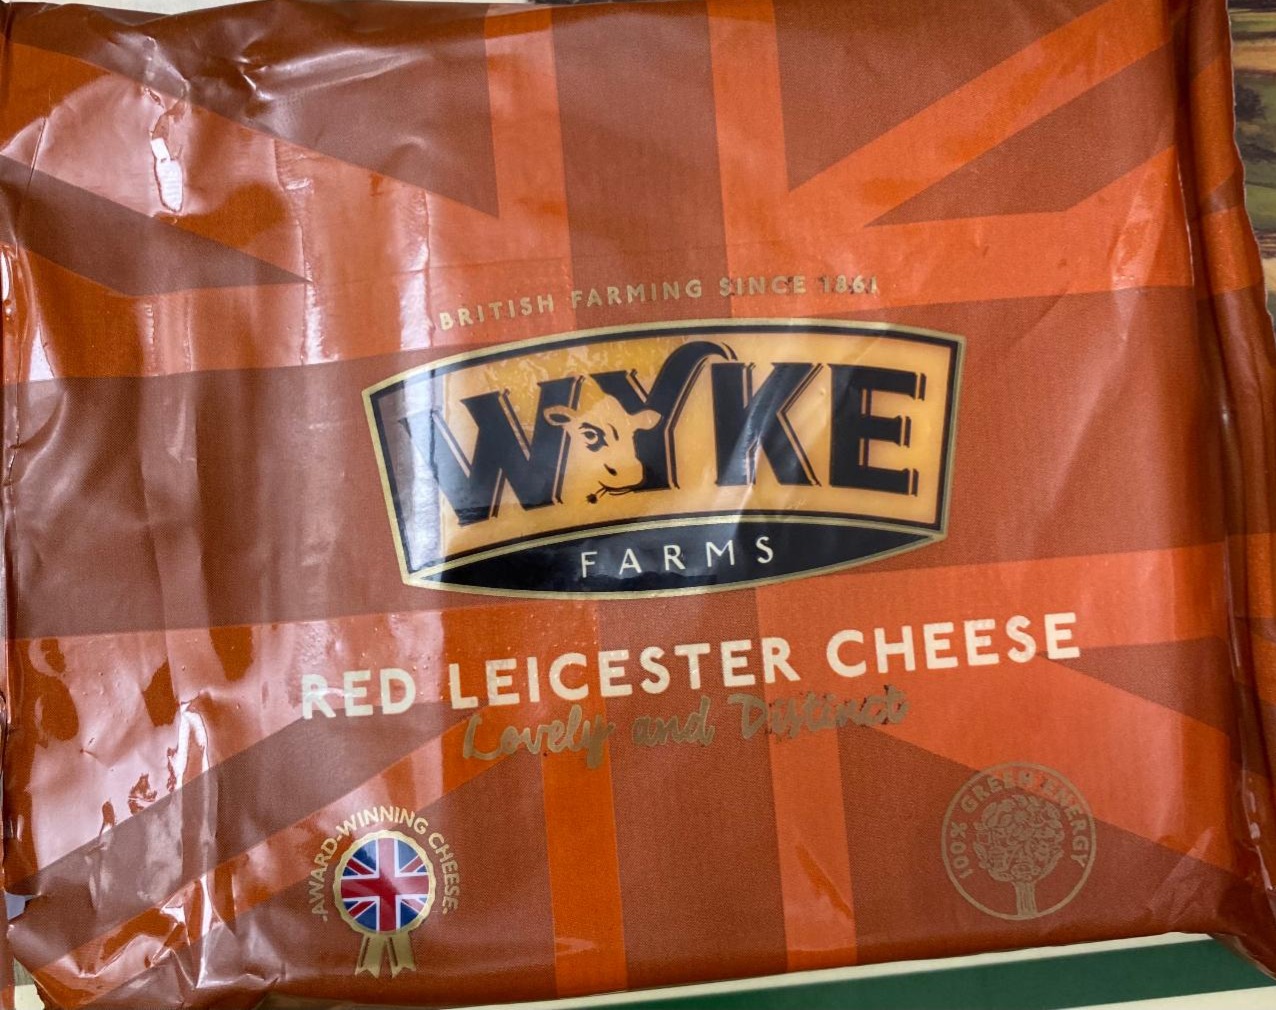 Fotografie - Red Leicester Cheese Wyke Farms